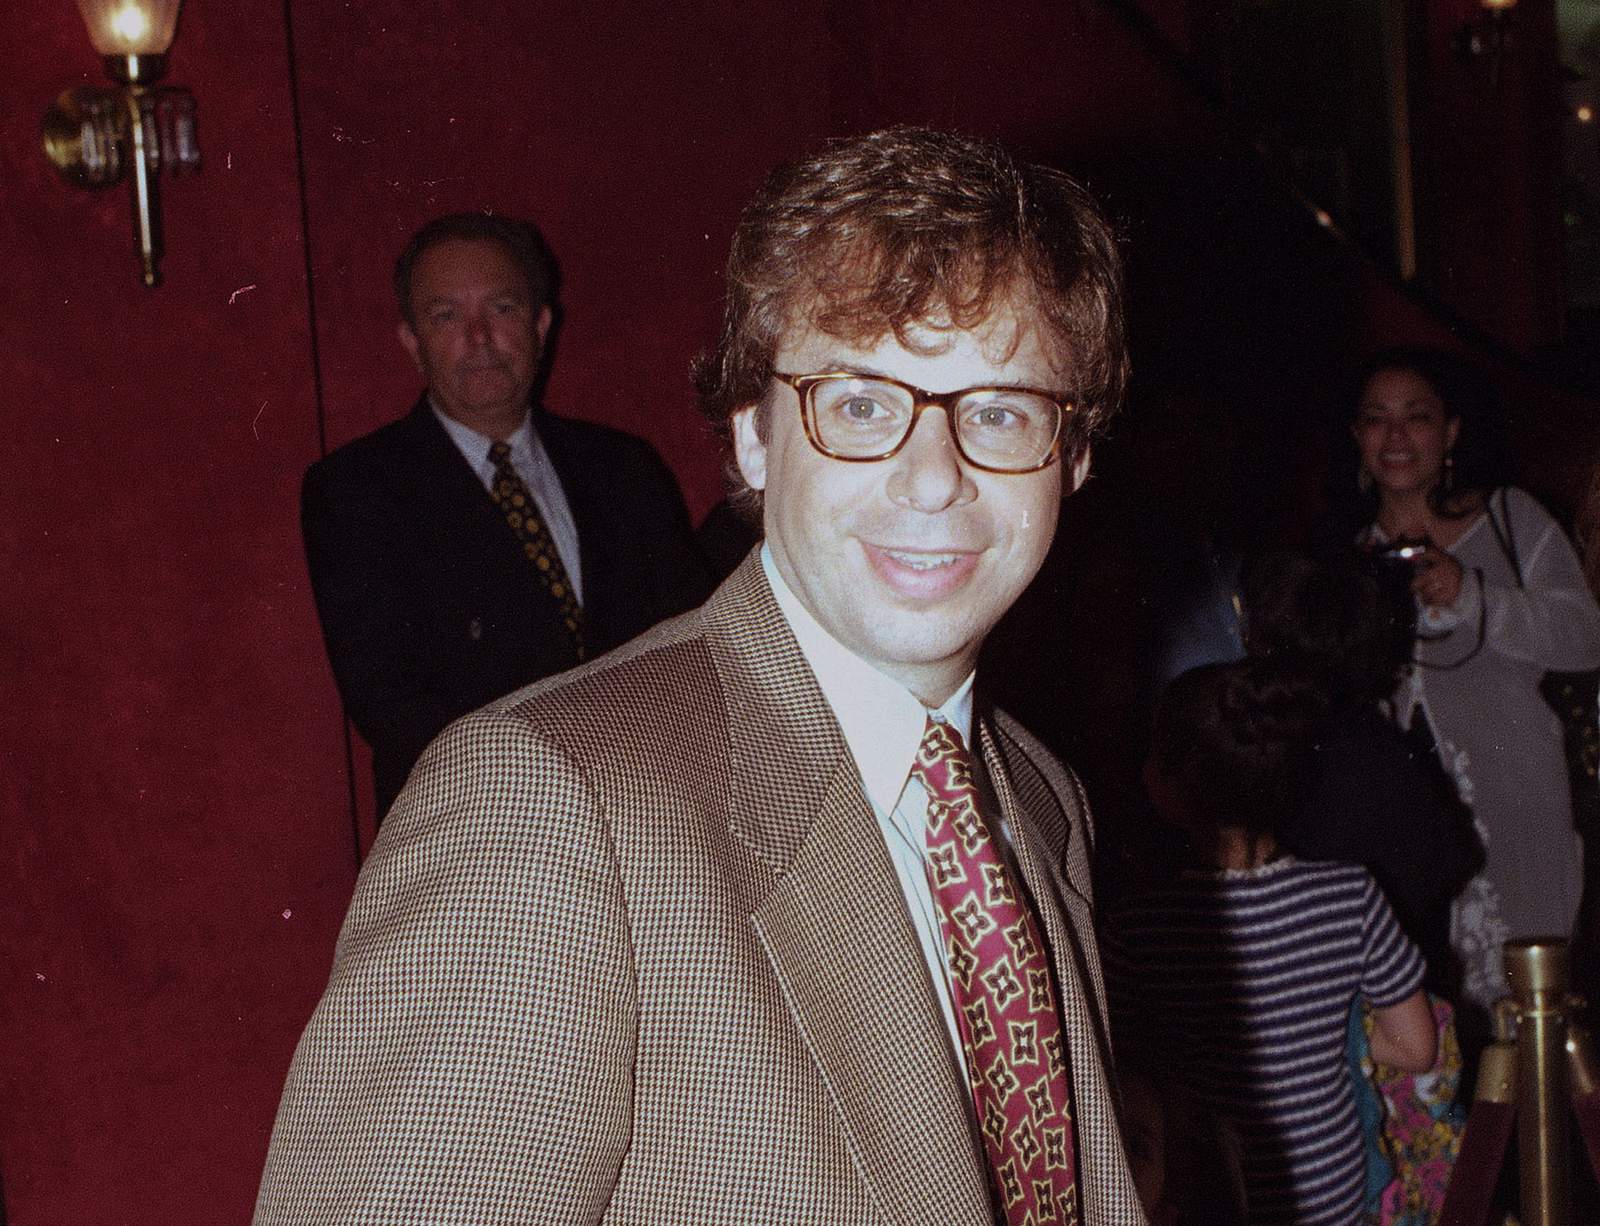 Police: Man accused of punching Rick Moranis attacked others